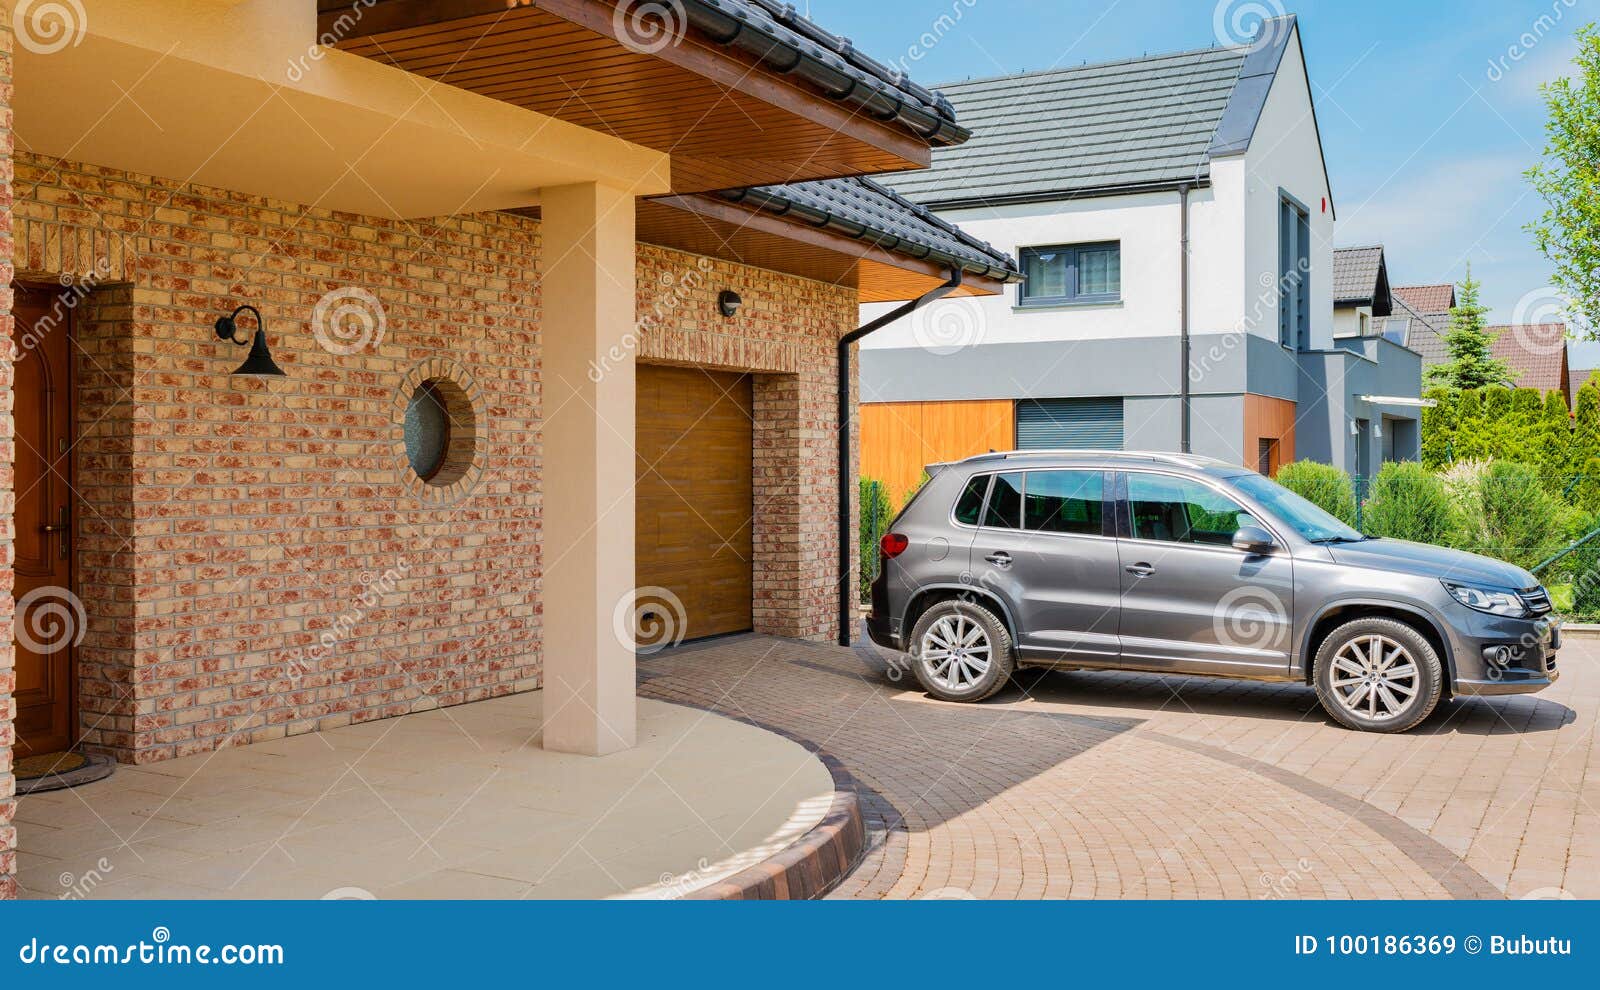 residential house with silver suv car parked on driveway in front